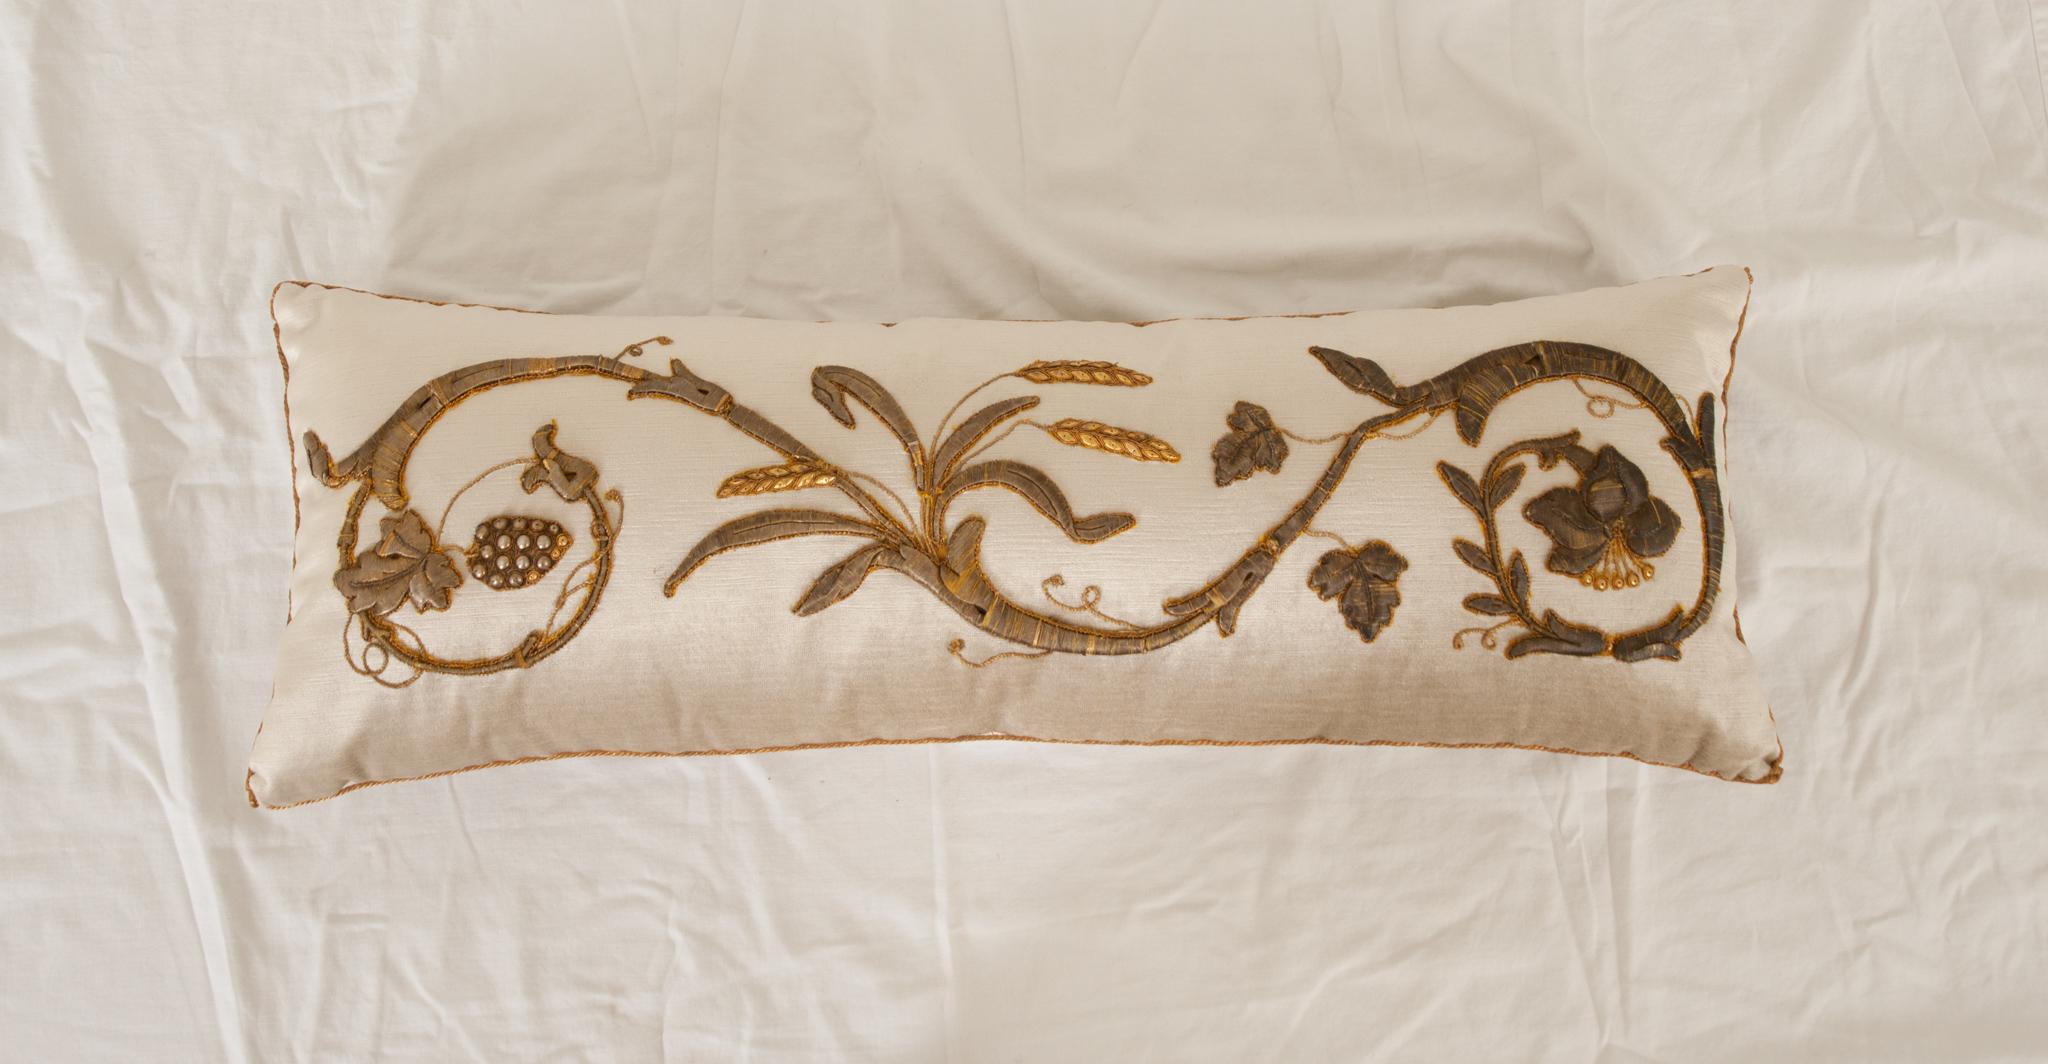 Antique European raised gold metallic embroidery depicting vining flowers and grapes bordered with antique gold metallic galon on velvet. Hand trimmed with vintage gold metallic cording, knotted in the corners. Down filled.